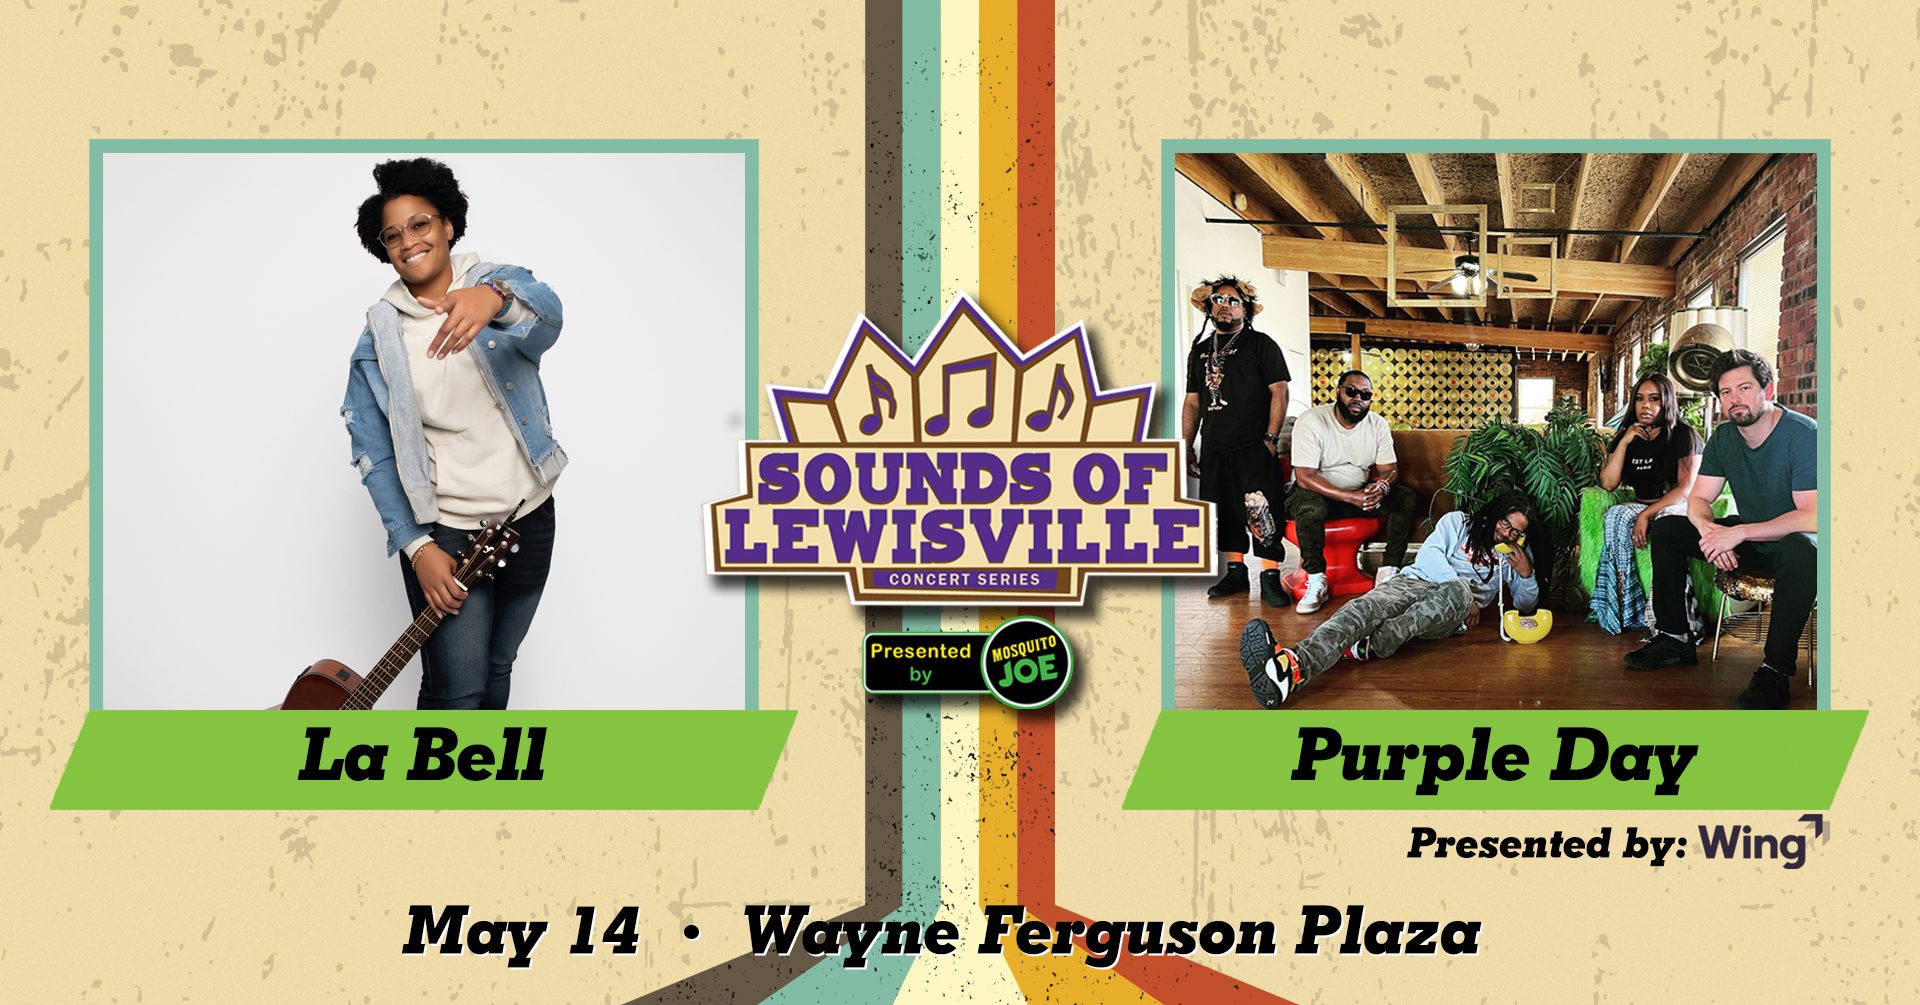 Sounds of Lewisville - May 14 concert